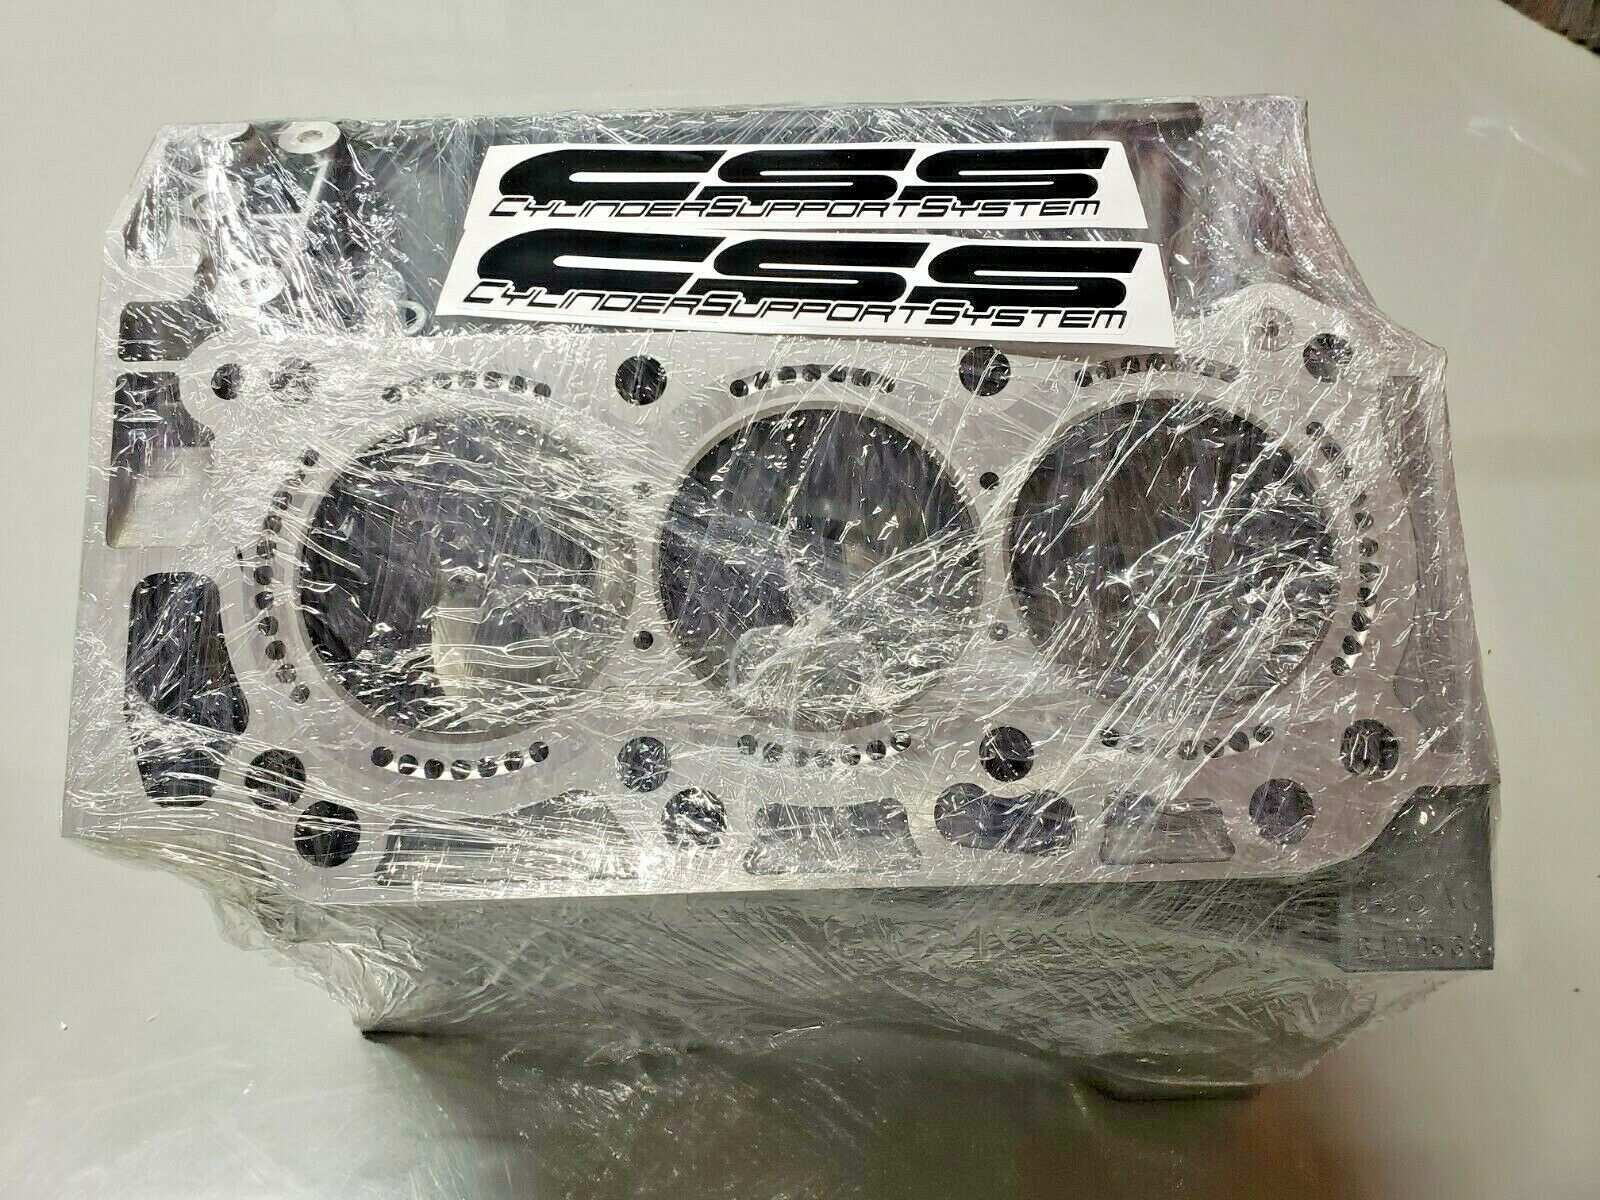 J Series Css Cylinder Block J35a1 Cylinder Support System 1000whp Rated